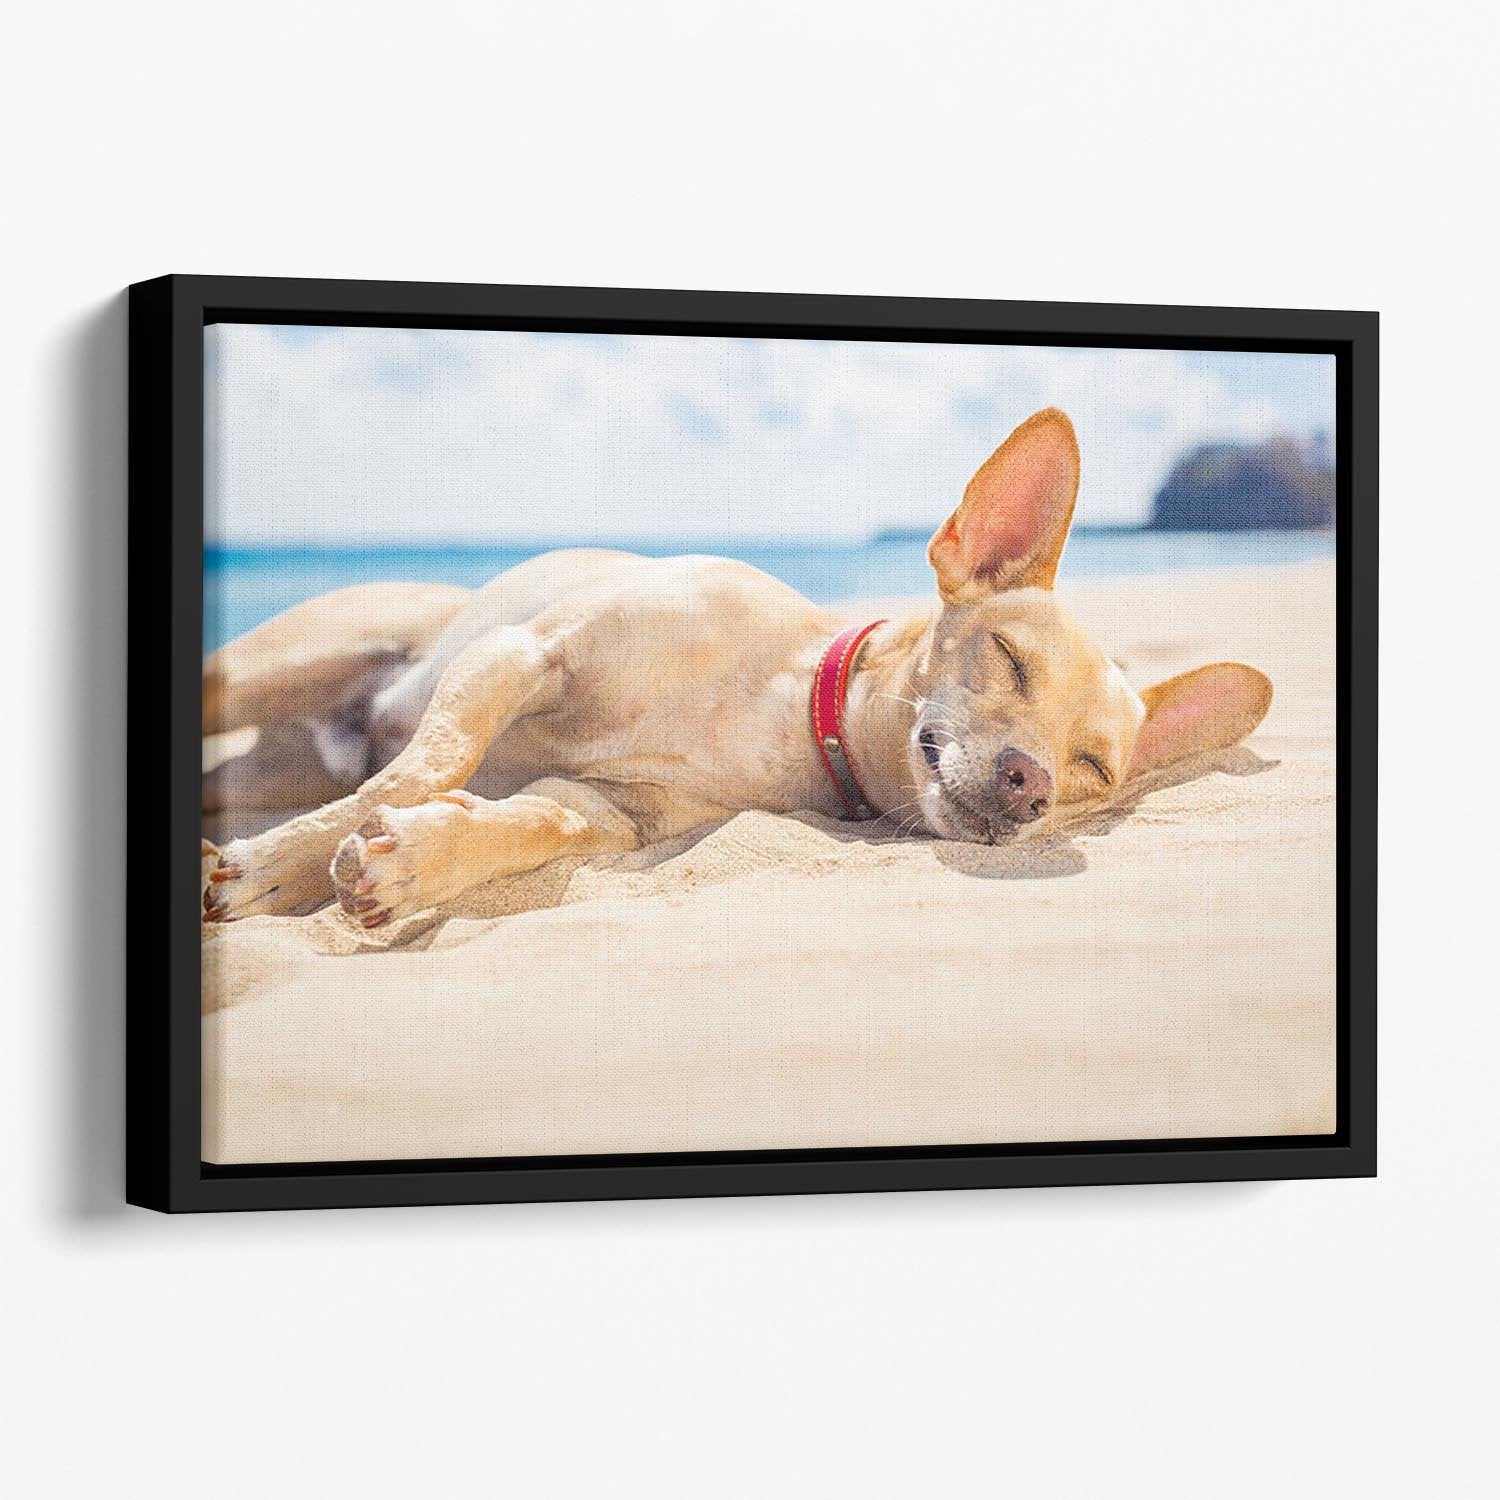 Chihuahua dog relaxing and resting Floating Framed Canvas - Canvas Art Rocks - 1